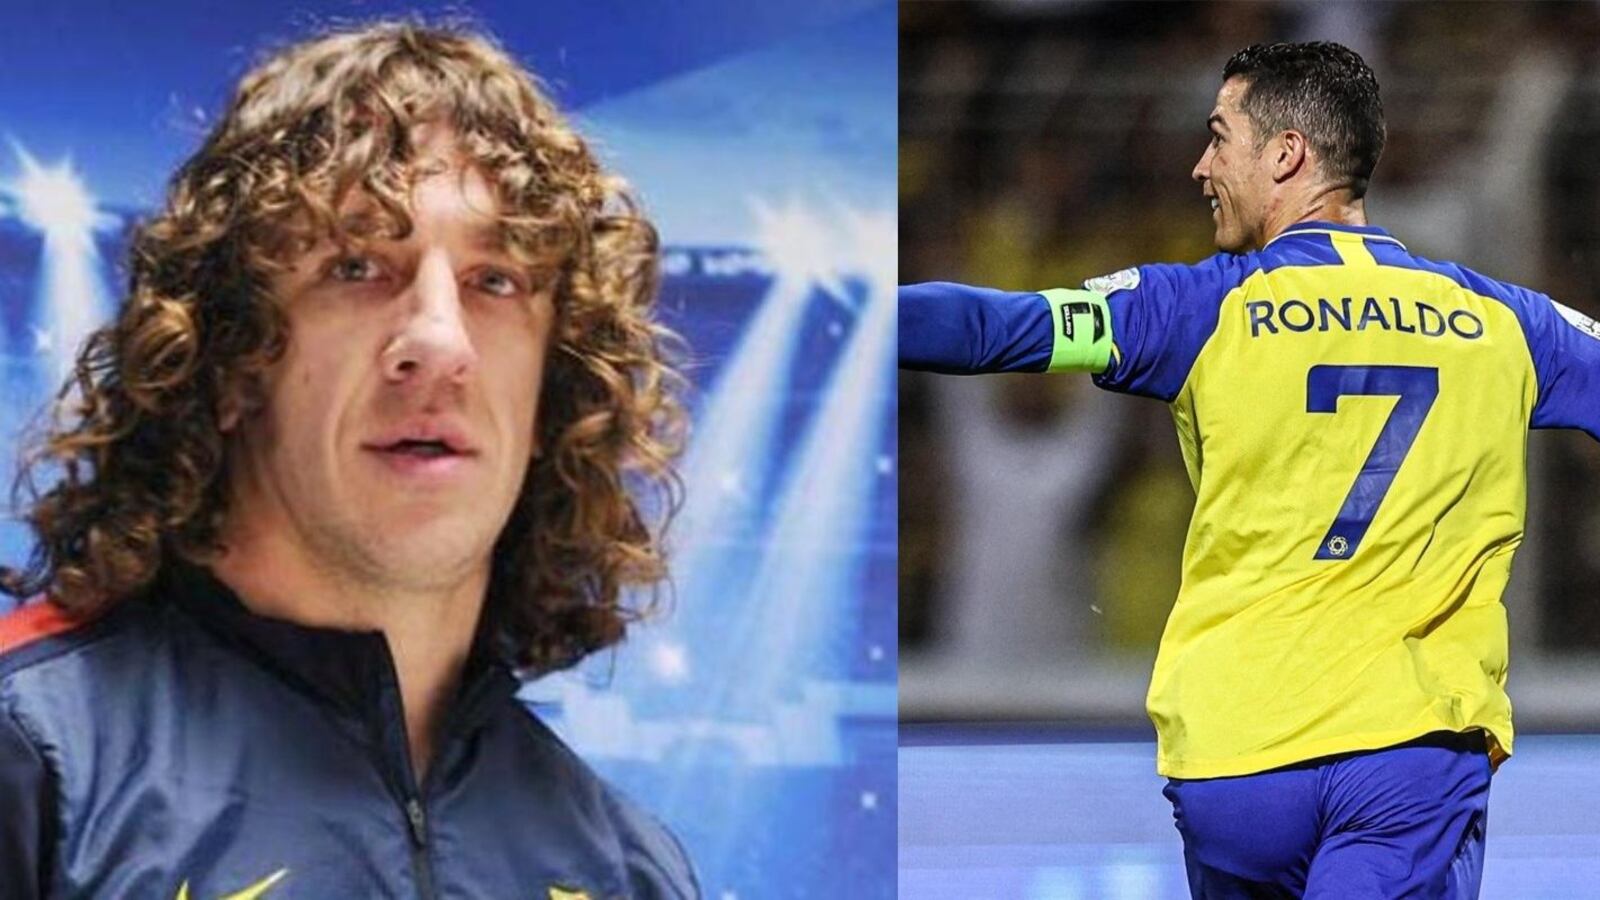 Carles Puyol chose his most difficult rival and it is not Cristiano Ronaldo